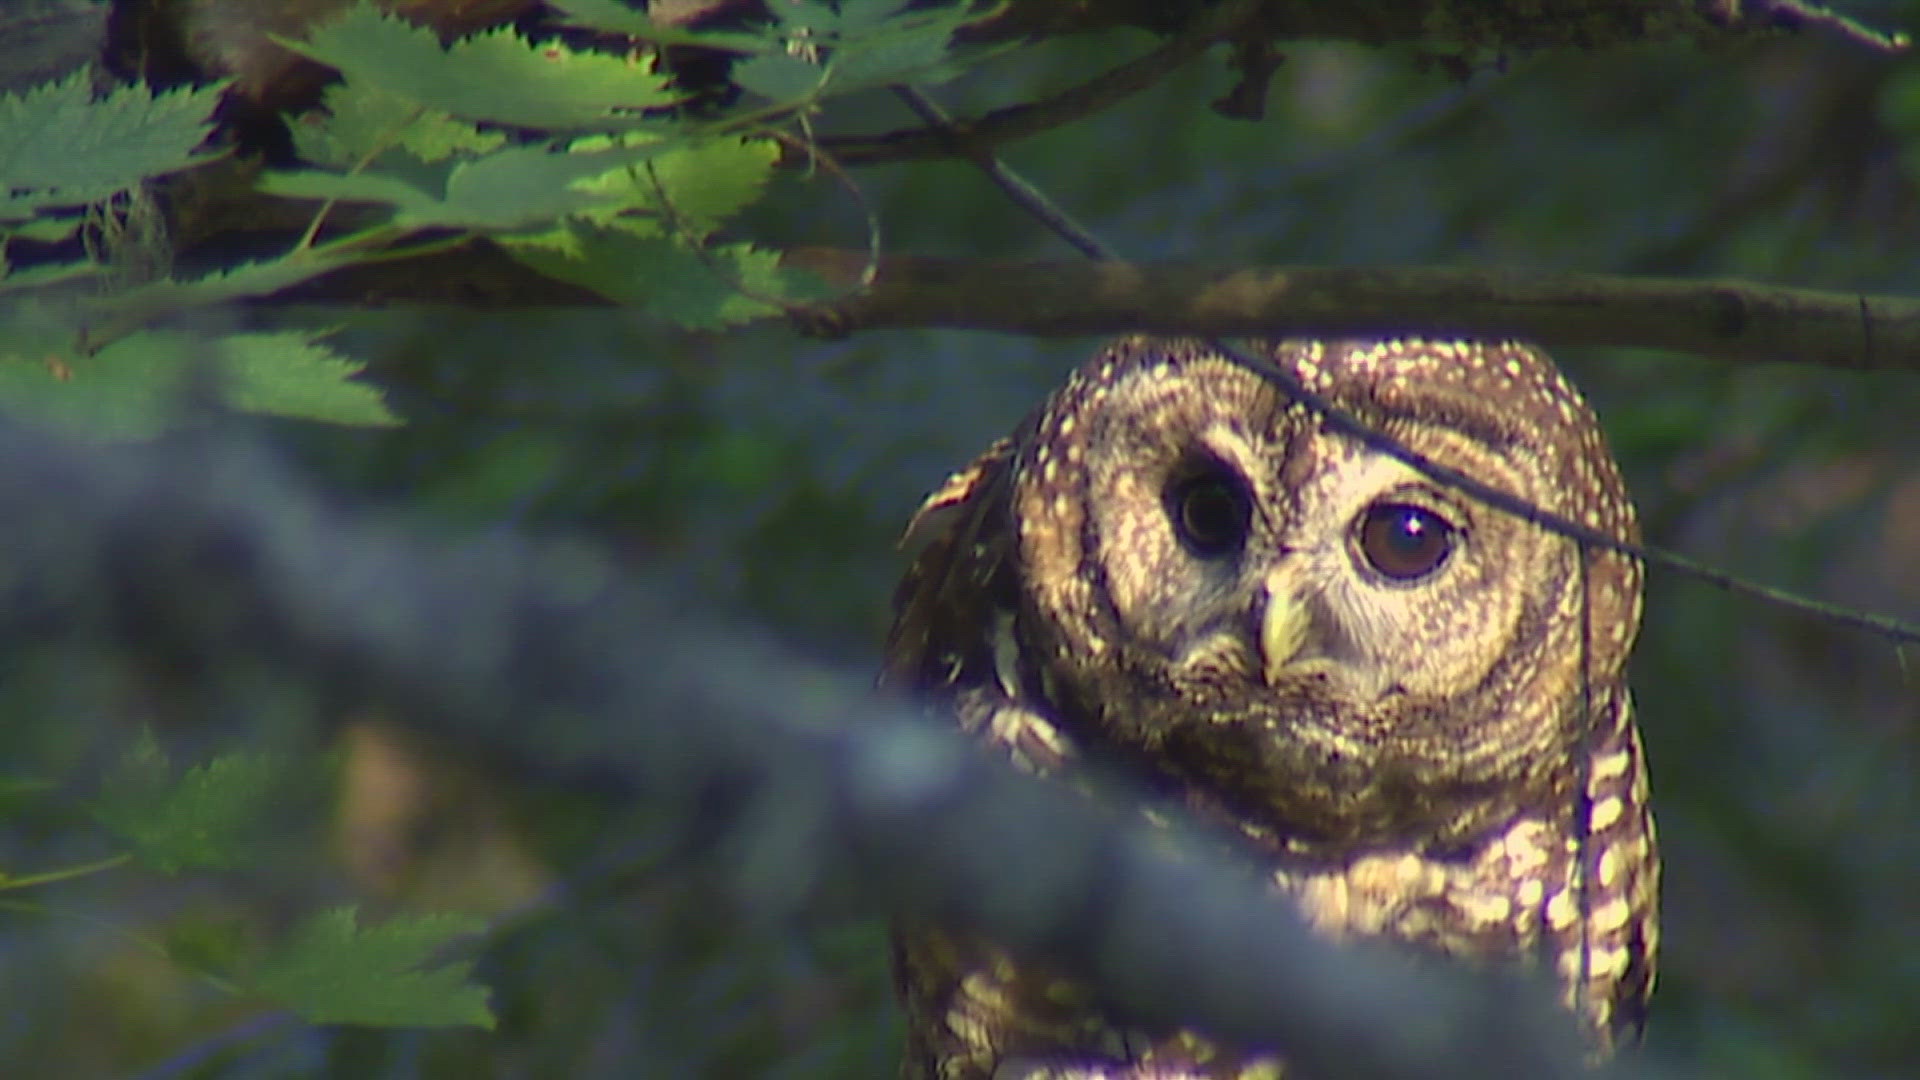 A U.S. Fish and Wildlife proposal to kill non-native barred owls to protect the endangered northern spotted owl has sparked controversy among conservation groups.